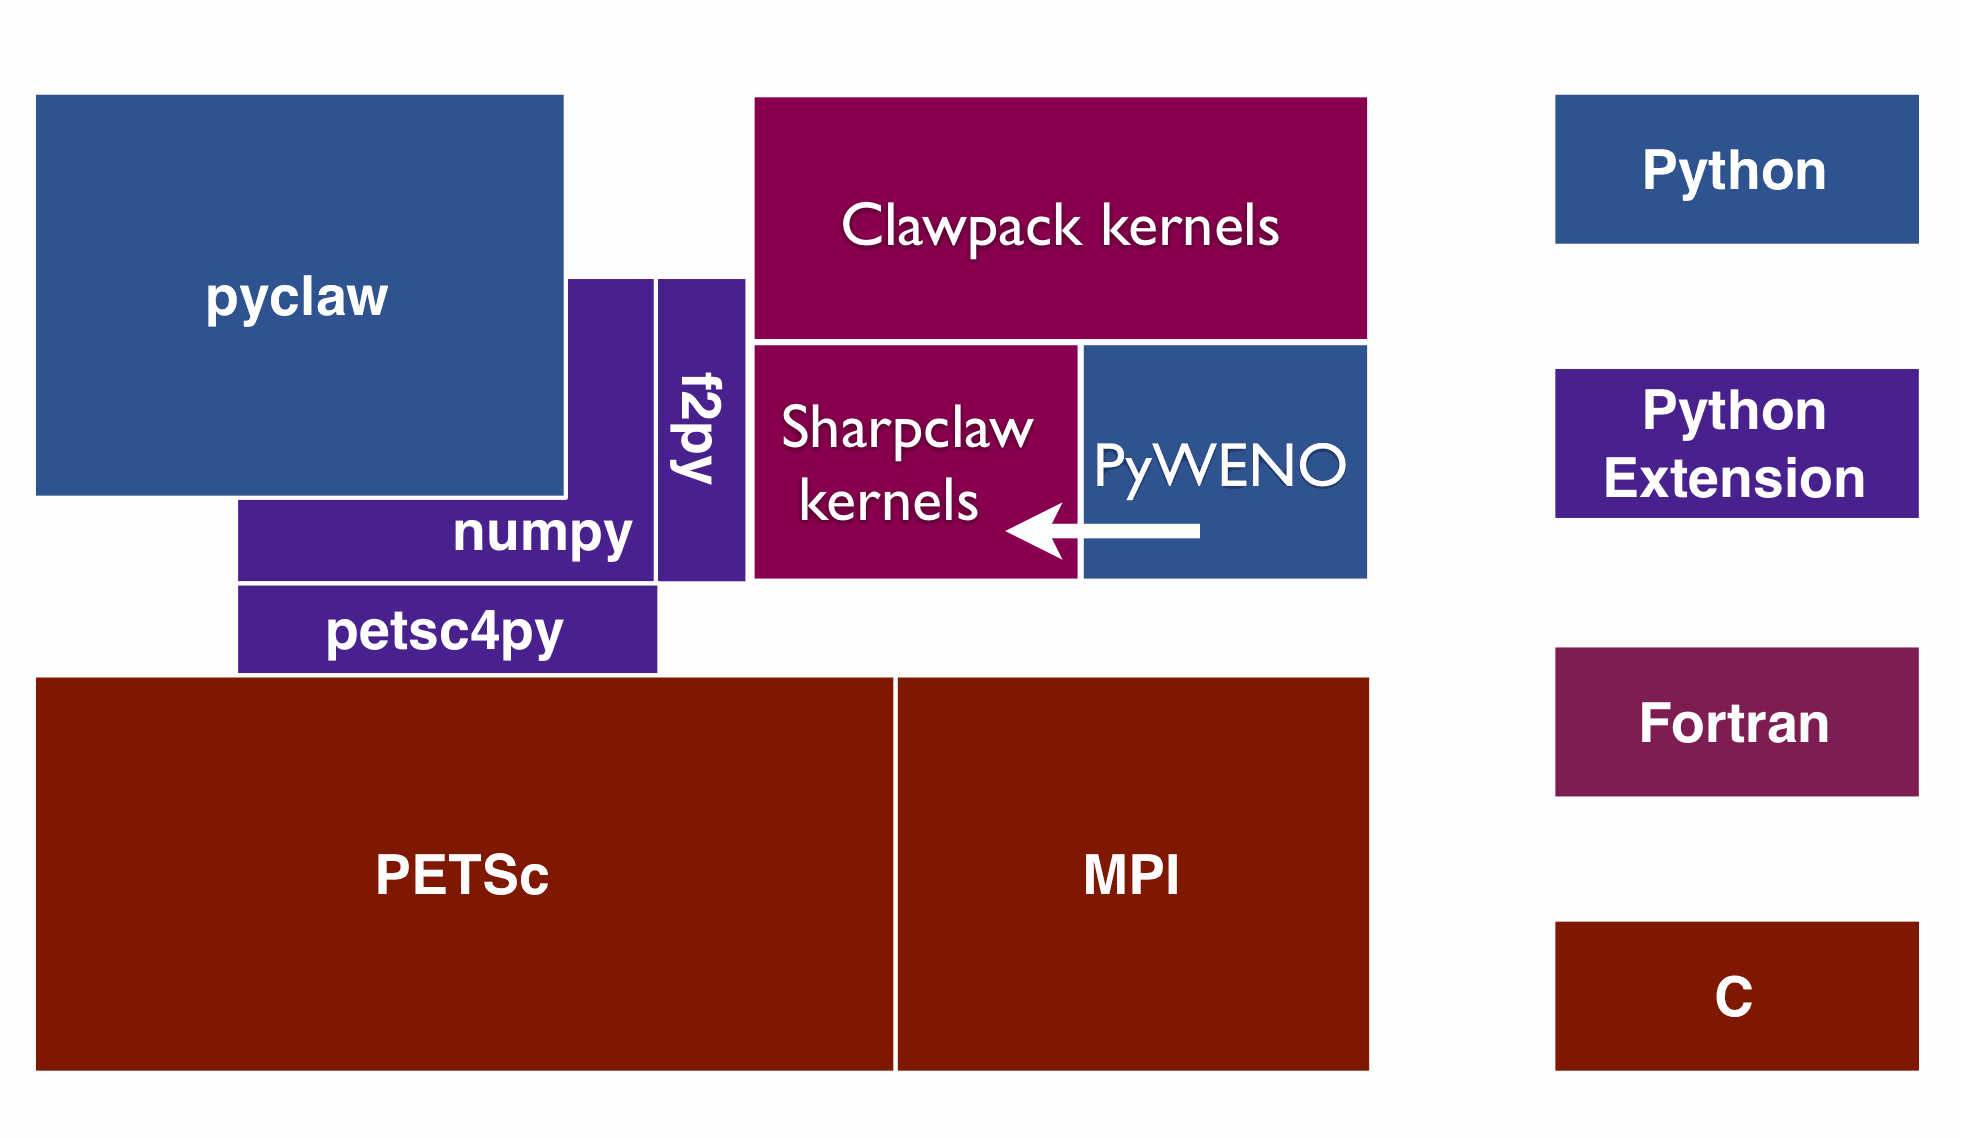 PyClaw architecture